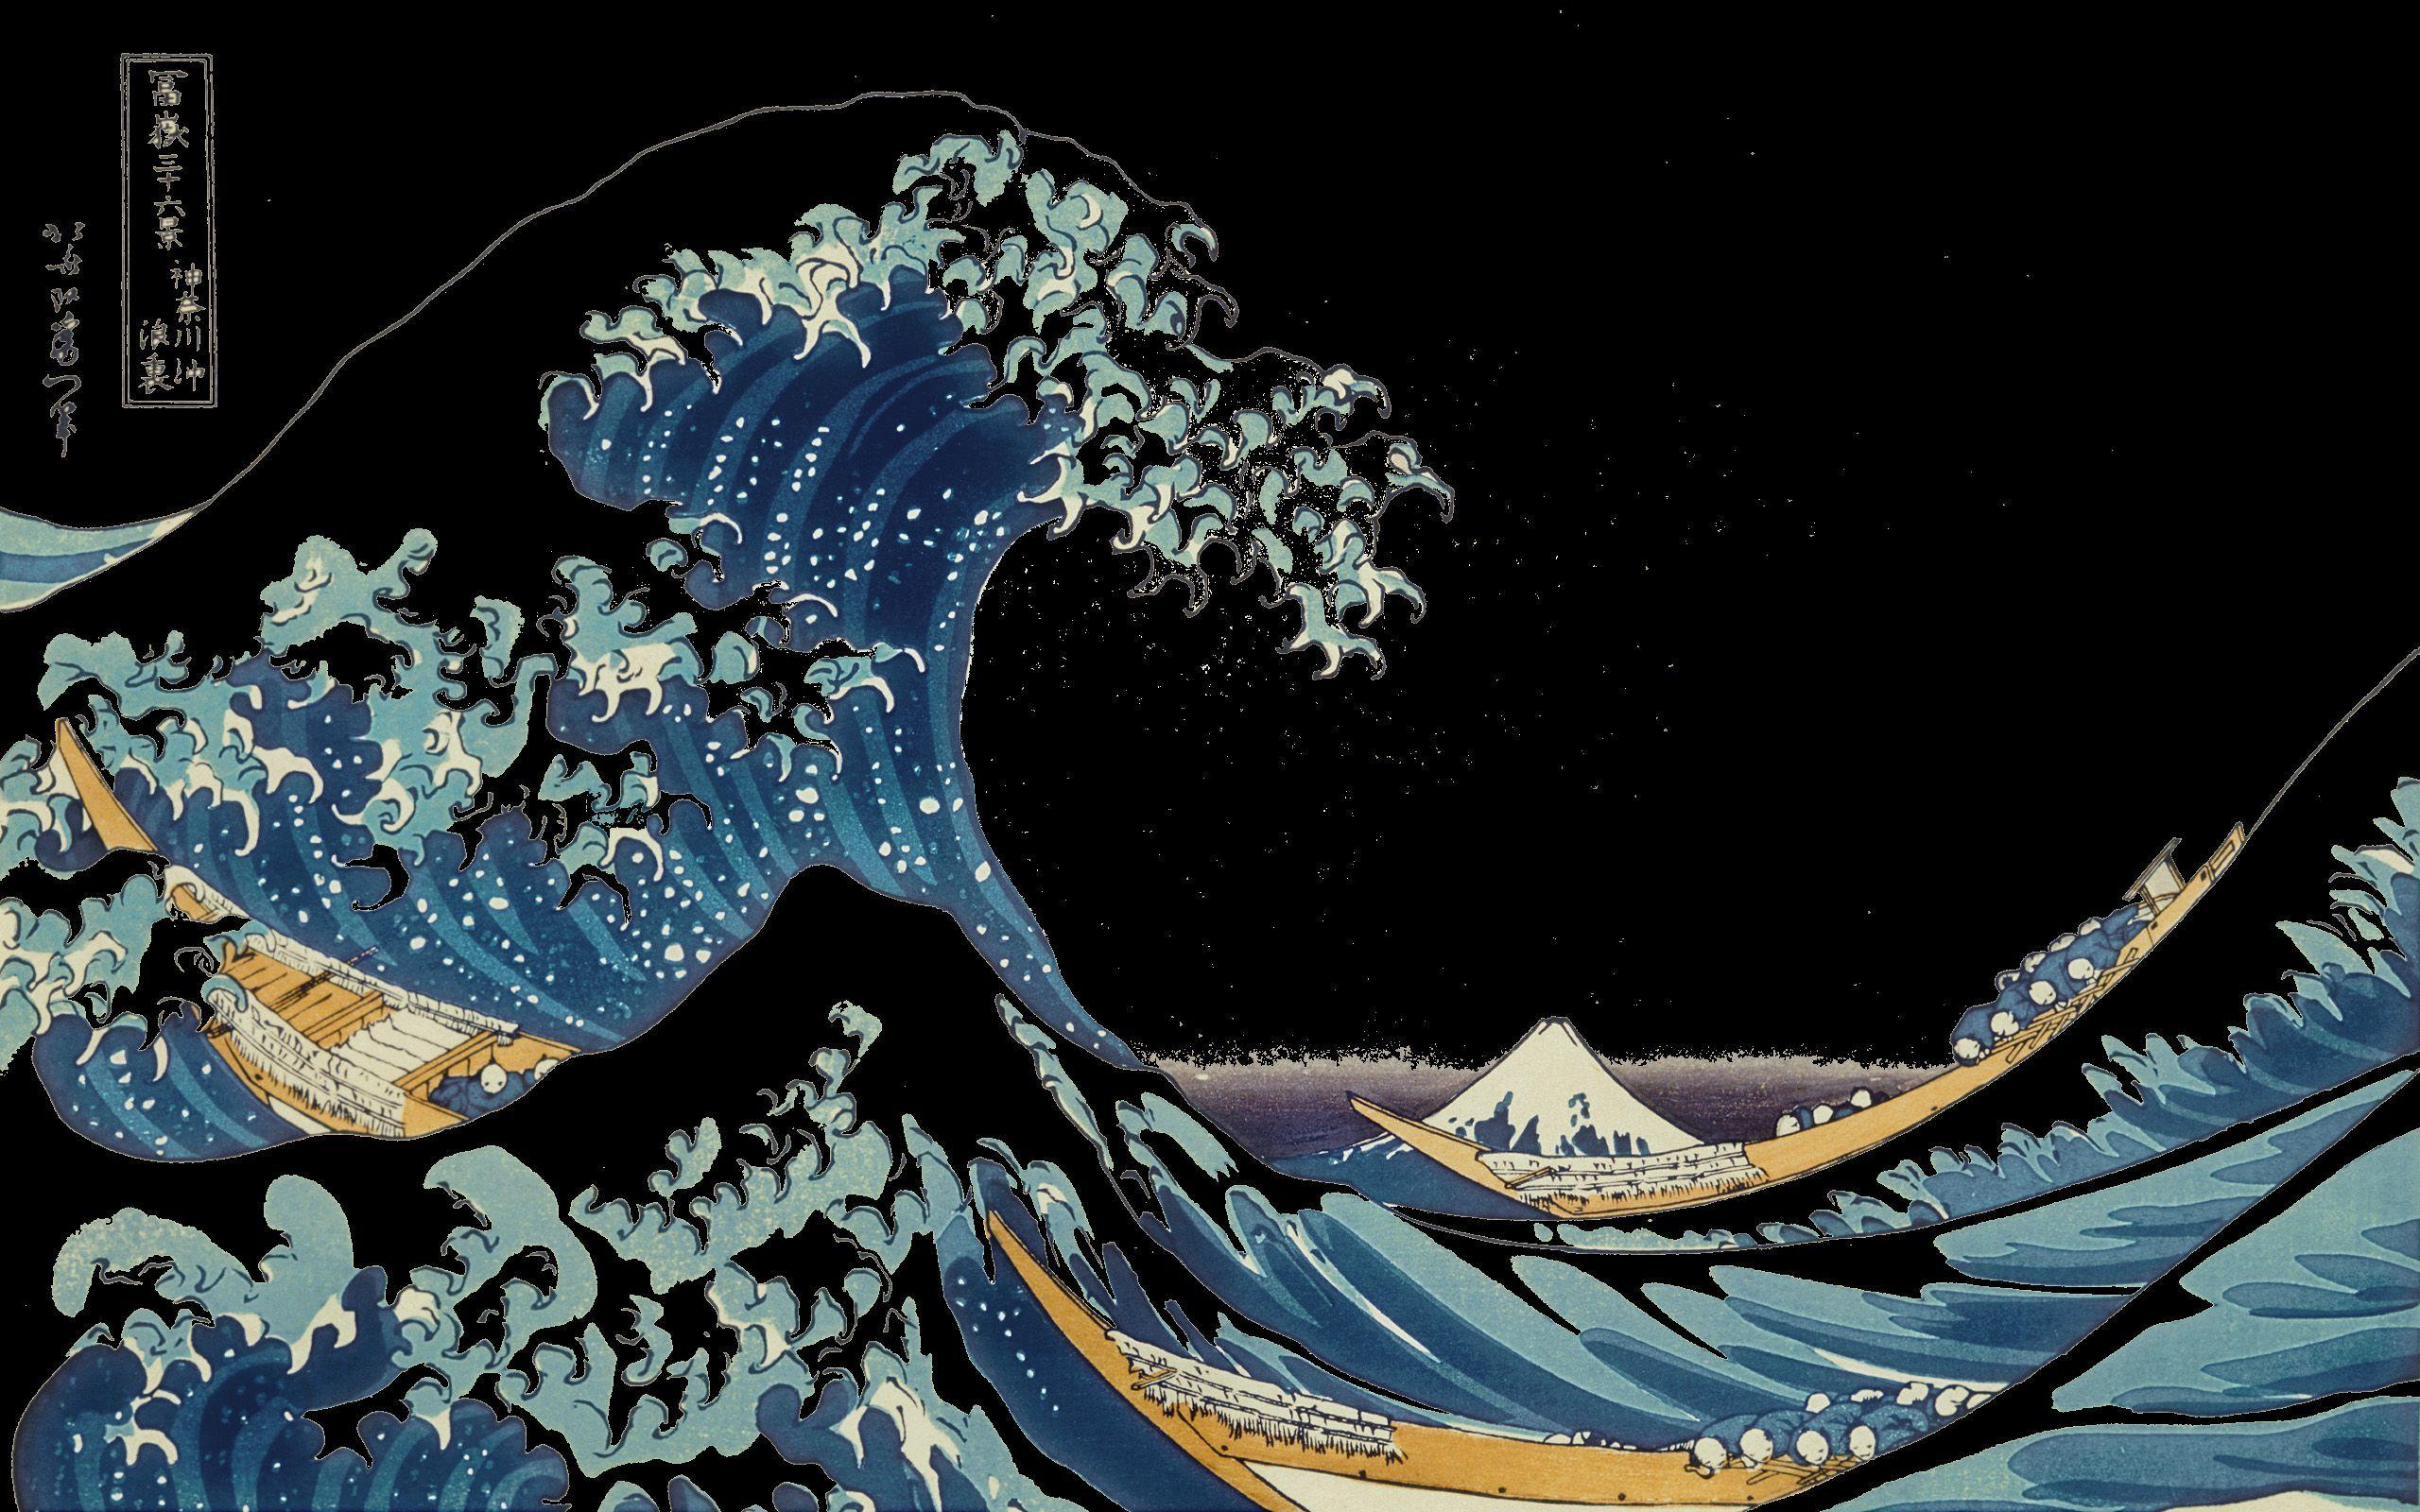 Download the The Great Wave Negative Wallpaper, The Great Wave